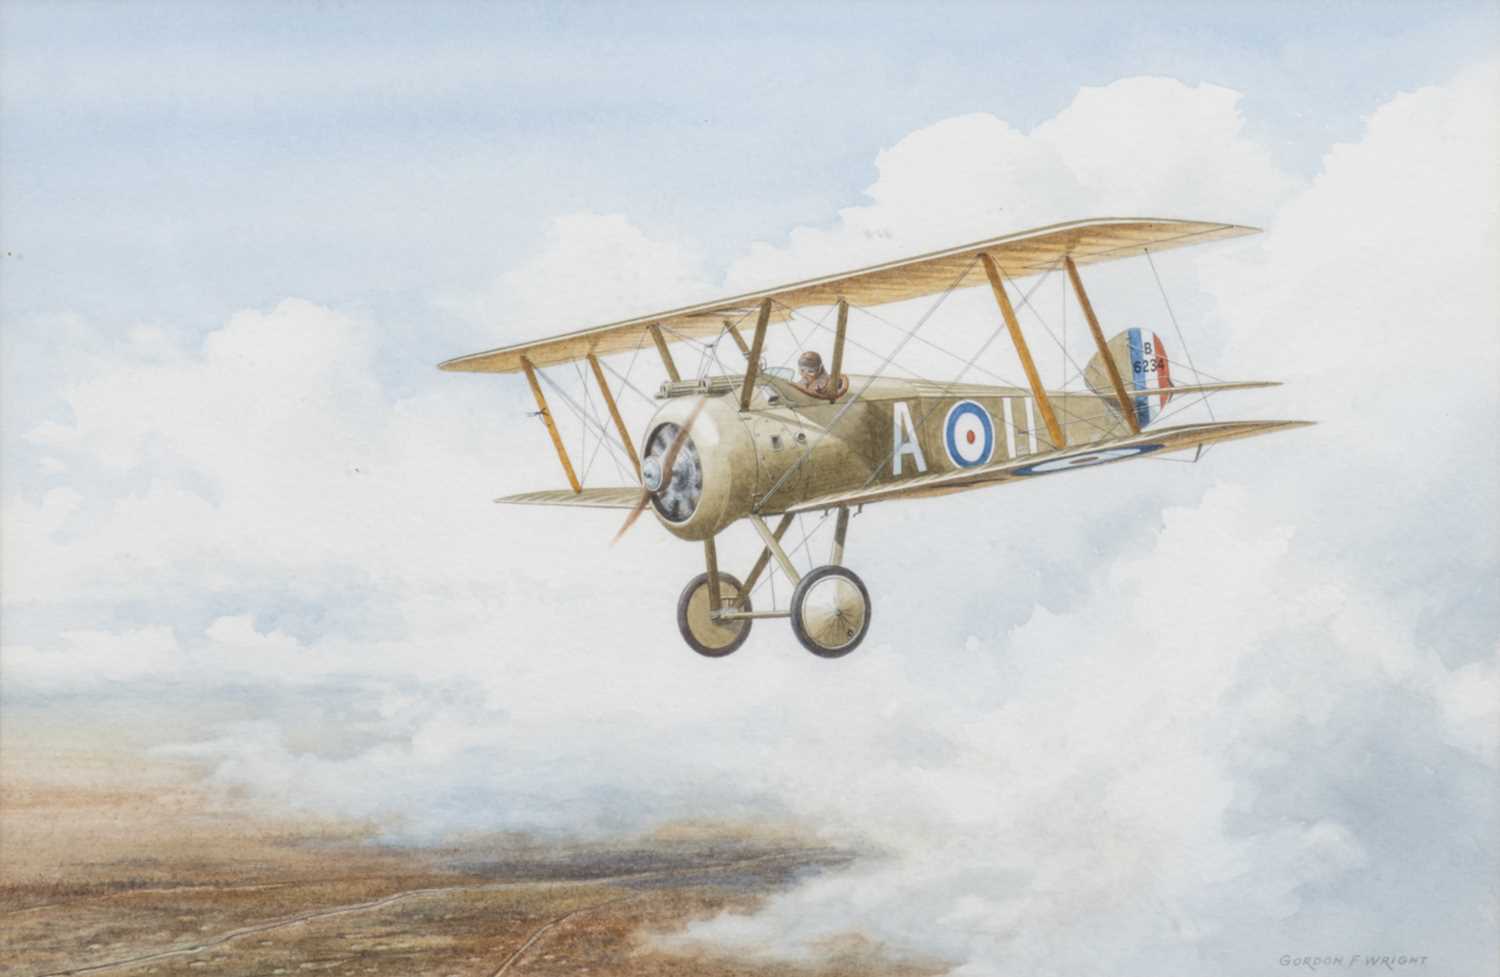 ‡ THE MILITARY CLUB HOUSE: GORDON WRIGHT, two watercolours - 'A Camel over the Lines', Sopwith F1 - Image 2 of 3